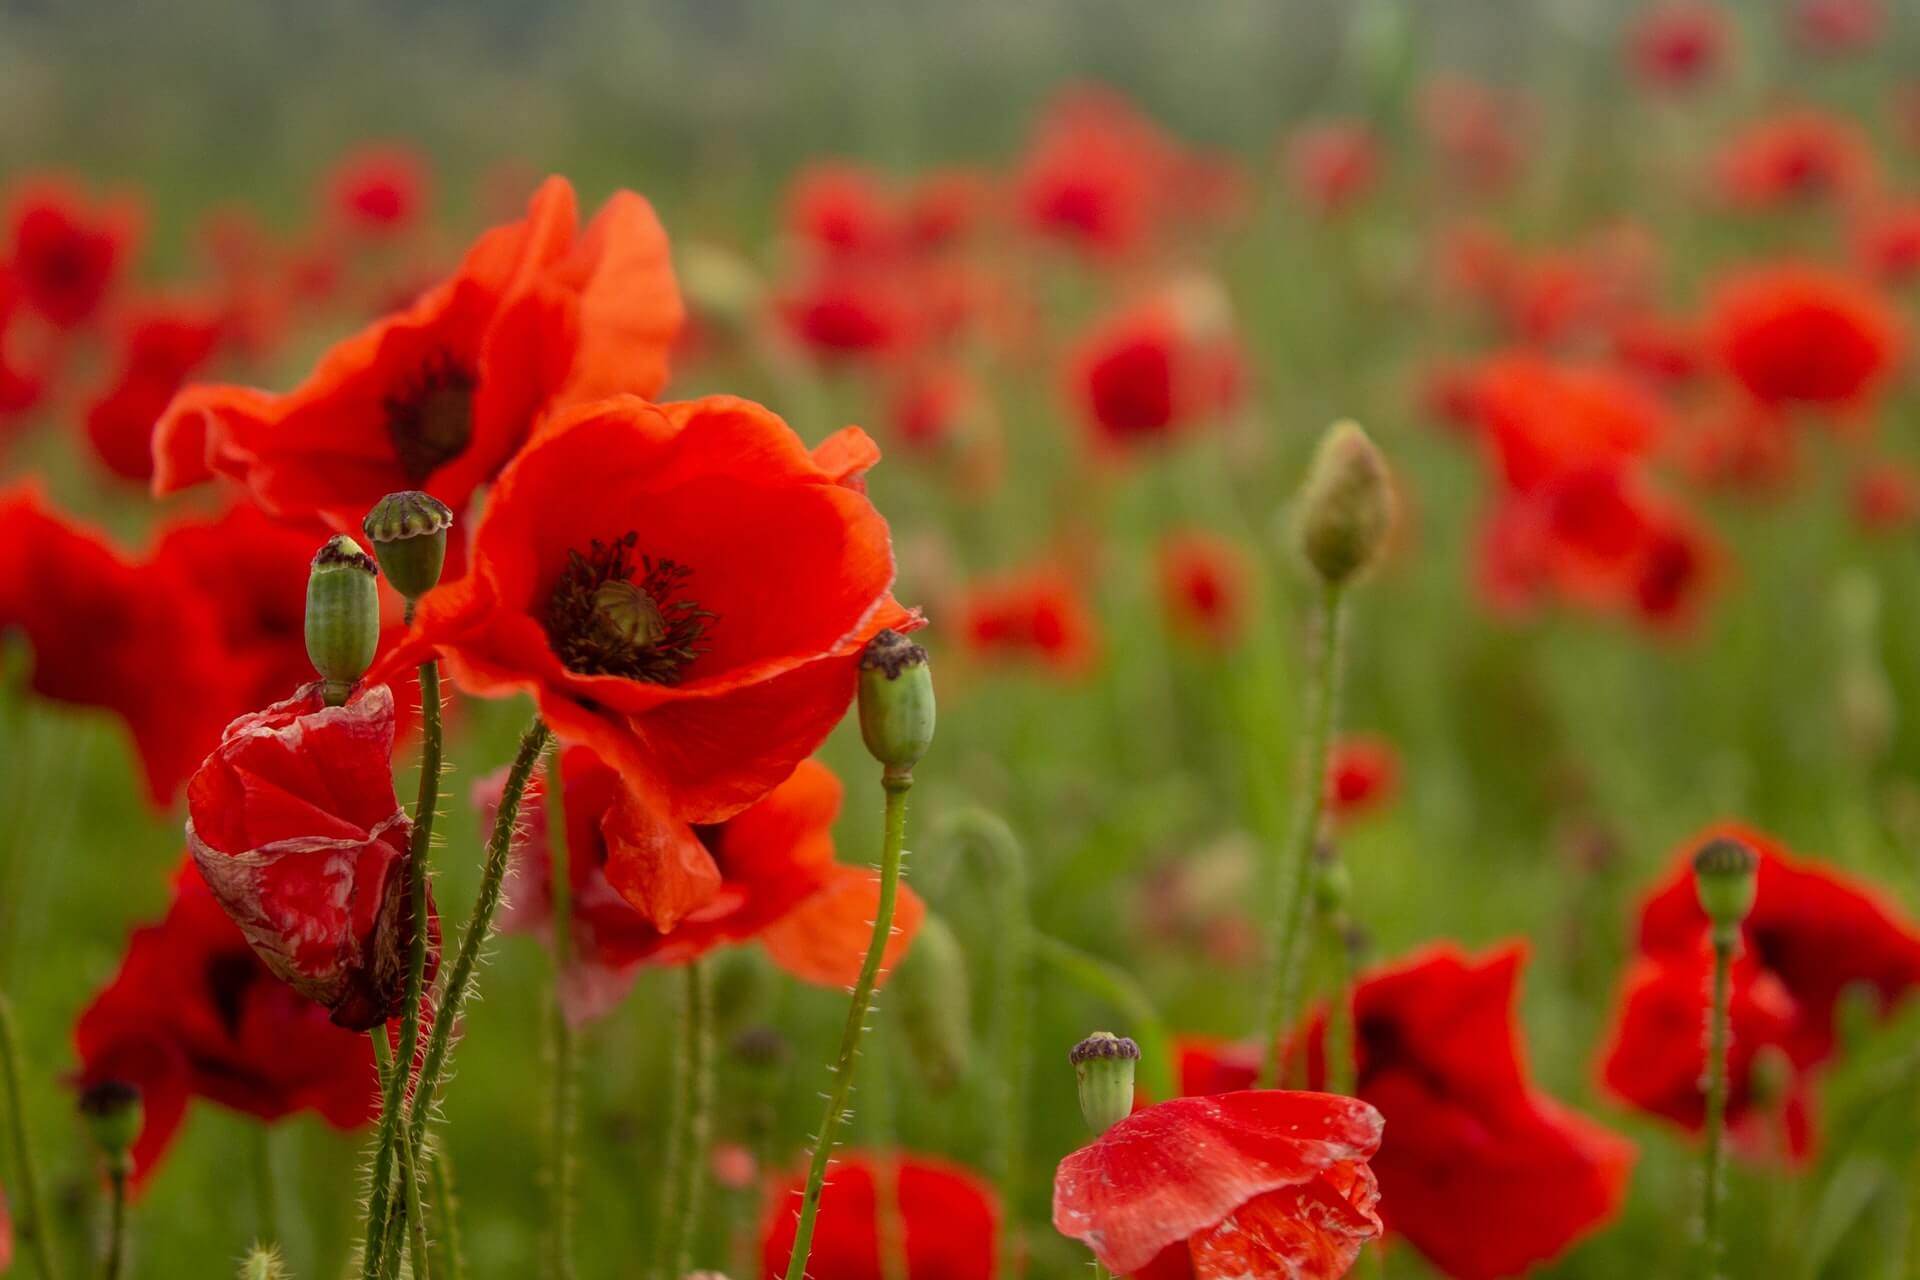 a field of poppies